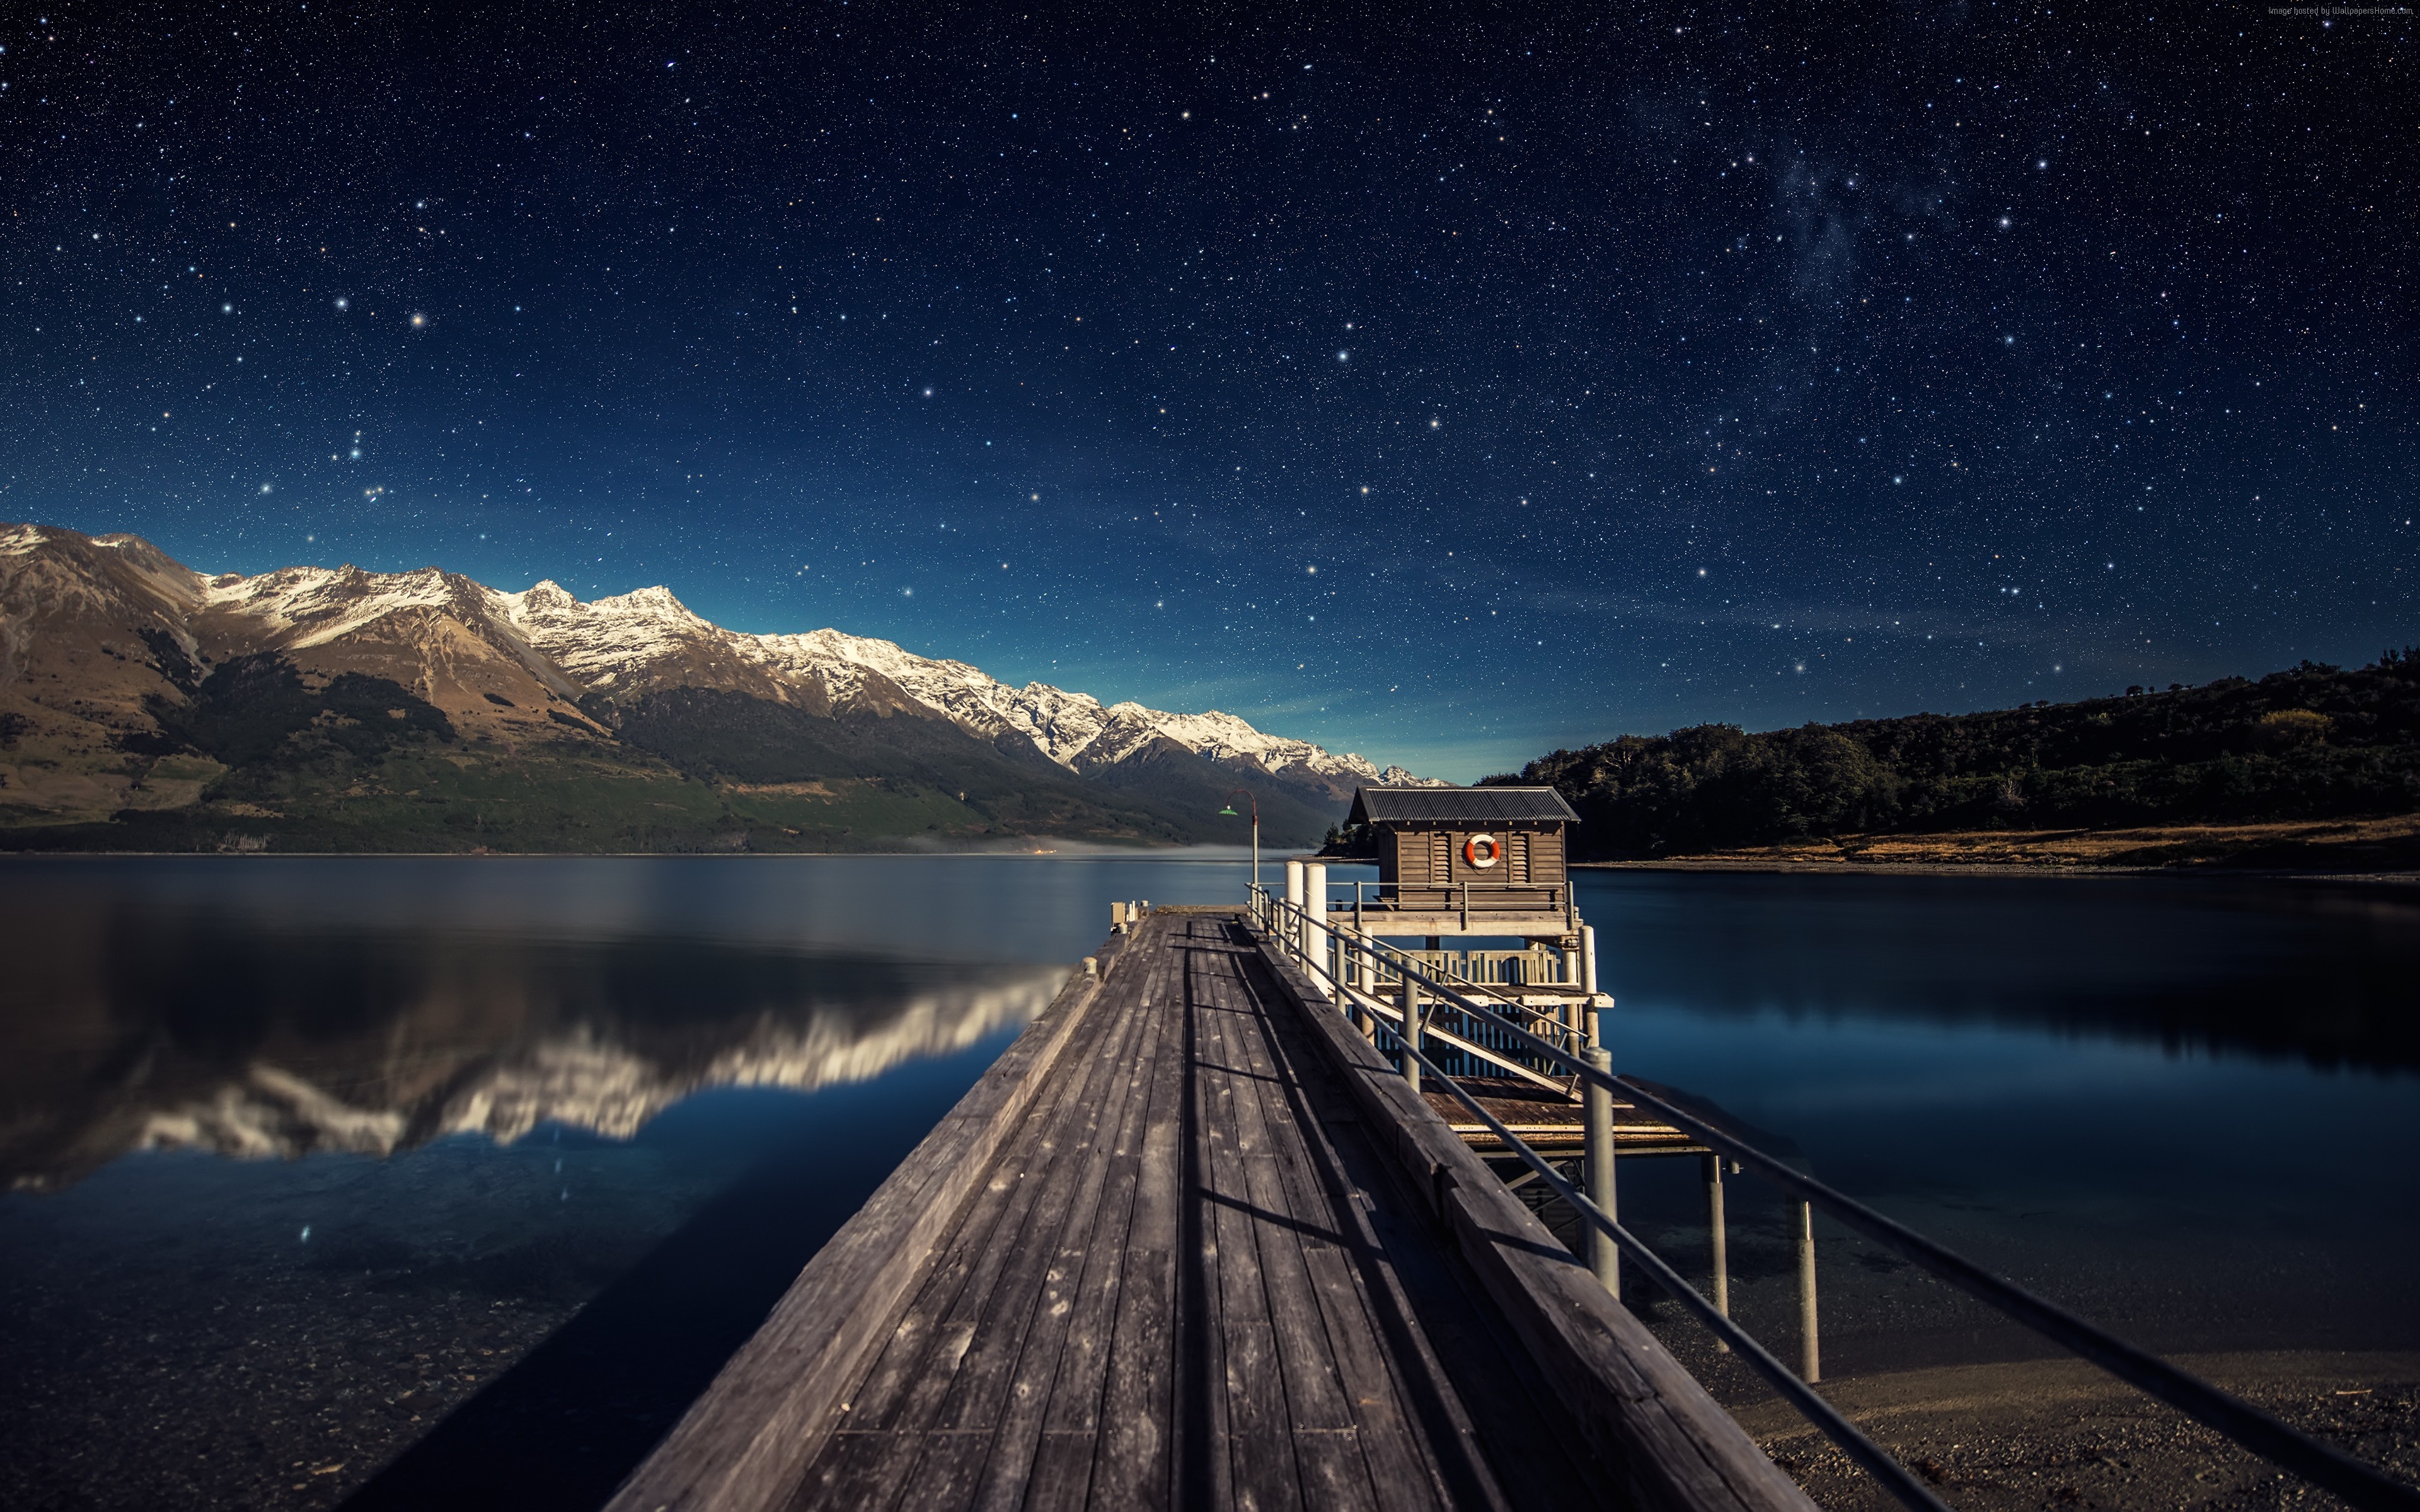 General 3840x2400 landscape mountains stars lake reflection sky pier outdoors nature water night jetty snowy mountain snow snowy peak wood watermarked low light